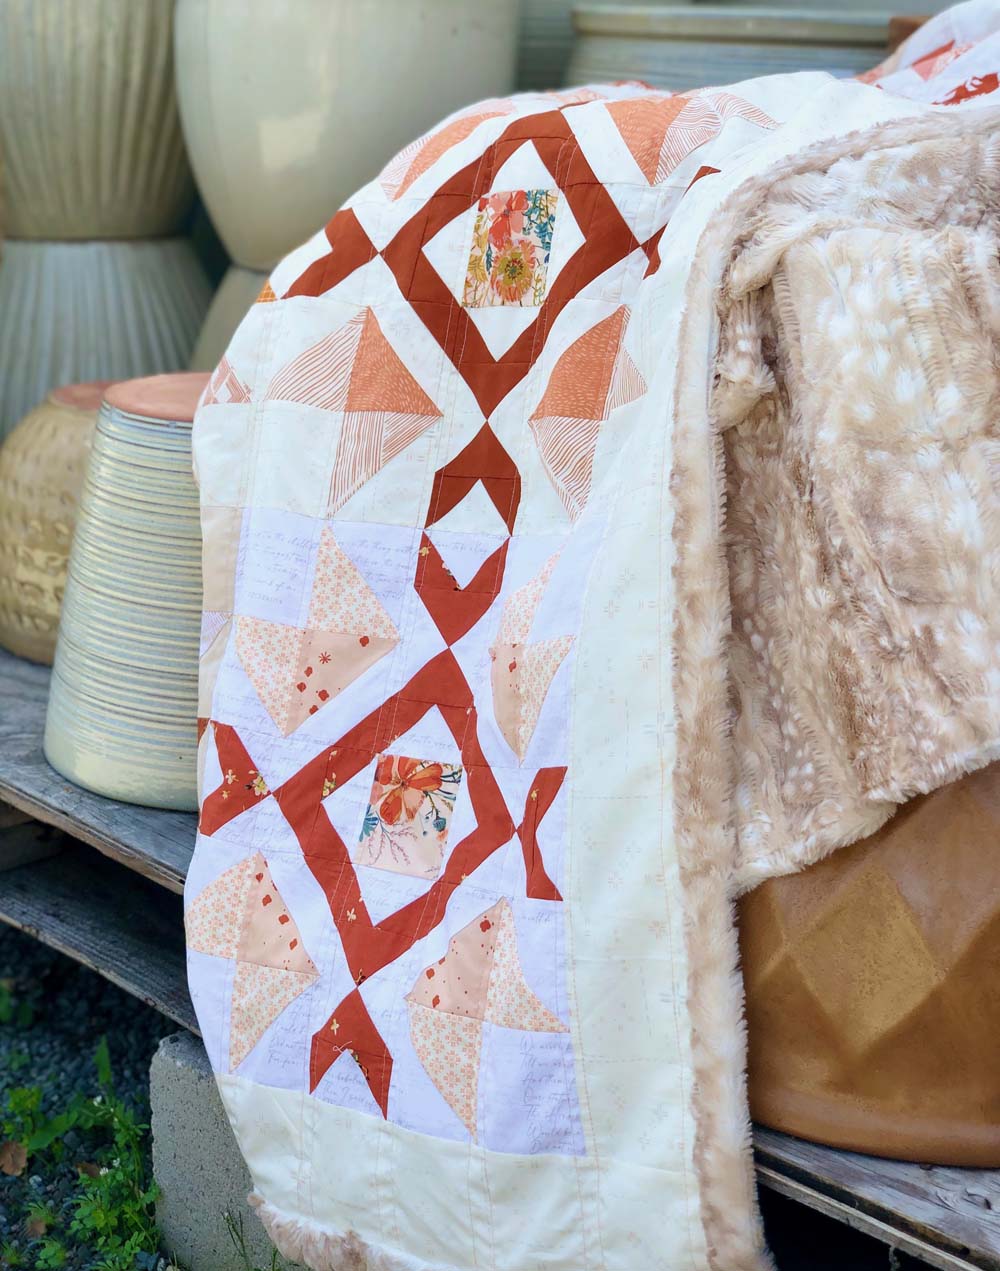 My Scrappy Arrow Stone Quilt got to join me at the local garden center for some photos.  Pattern by The Crafty Quilter Designs, available on Etsy.